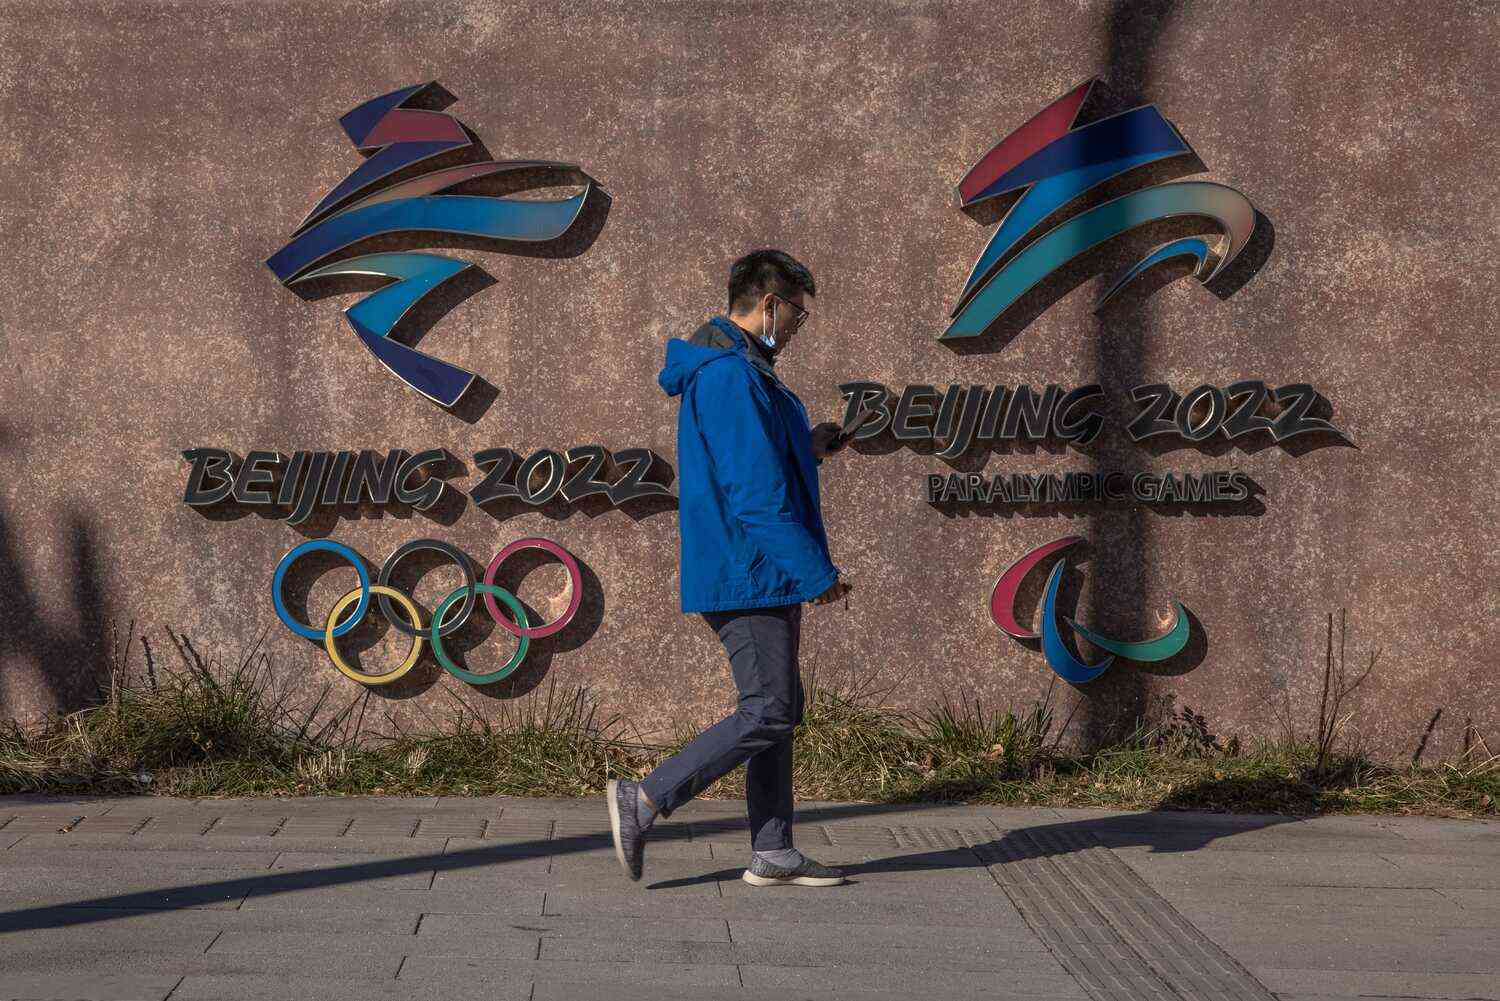 U.S. to not go to Beijing for Olympics